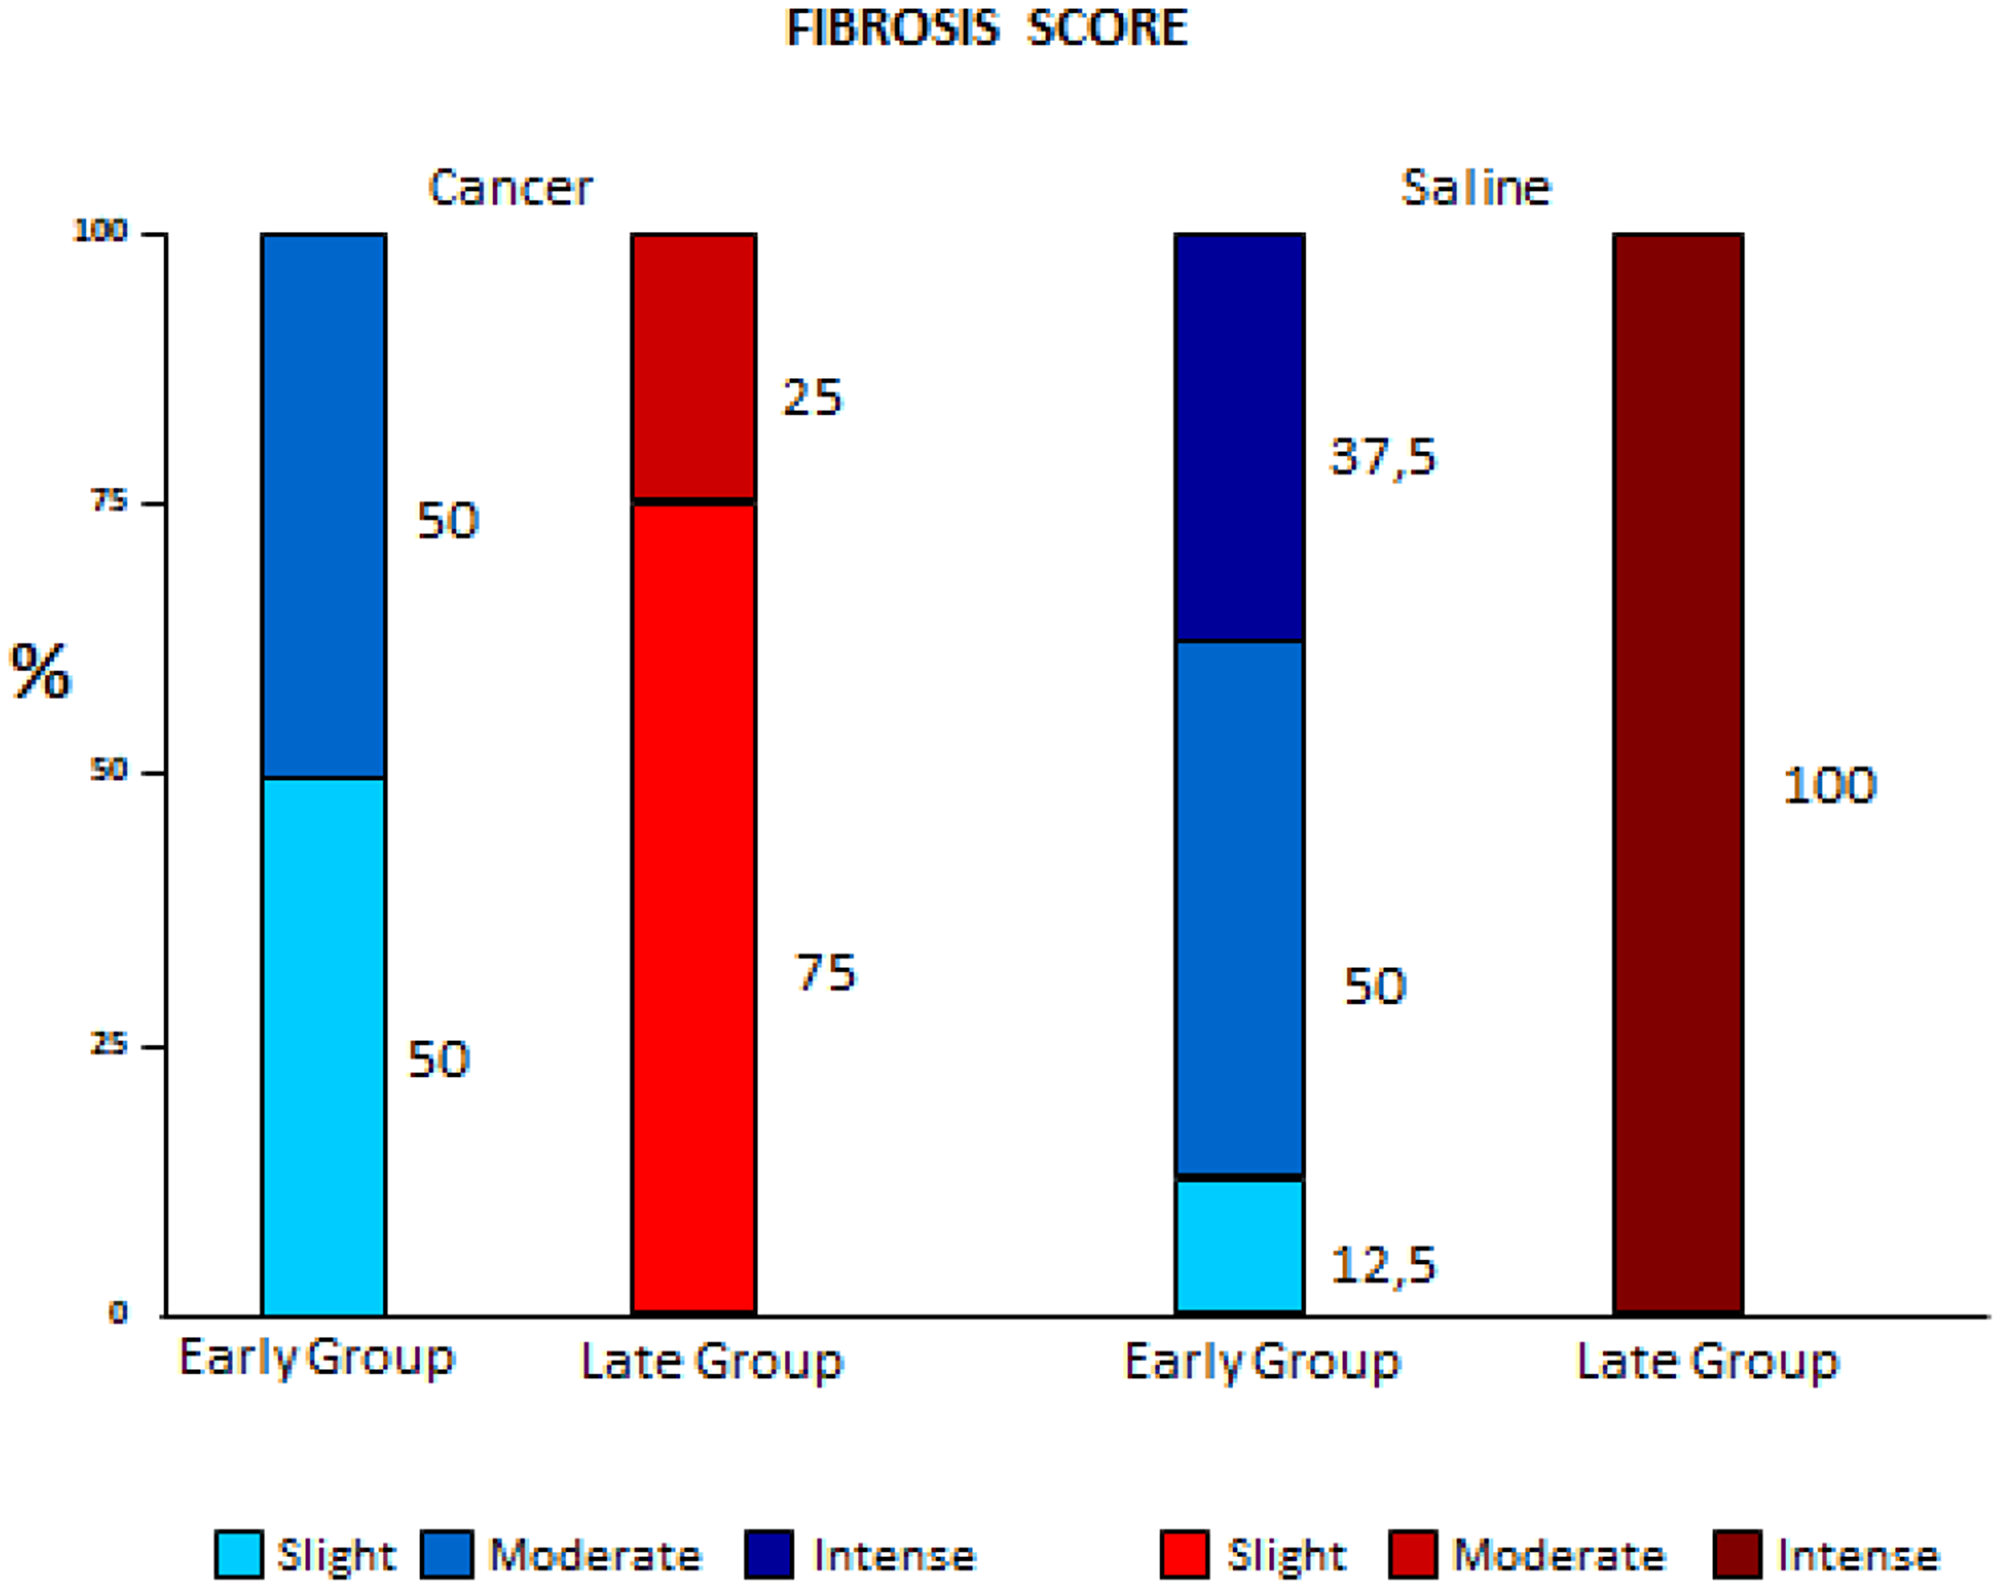 Comparison of fibrosis variation between early and late pleurodesis and between cancer and saline groups.